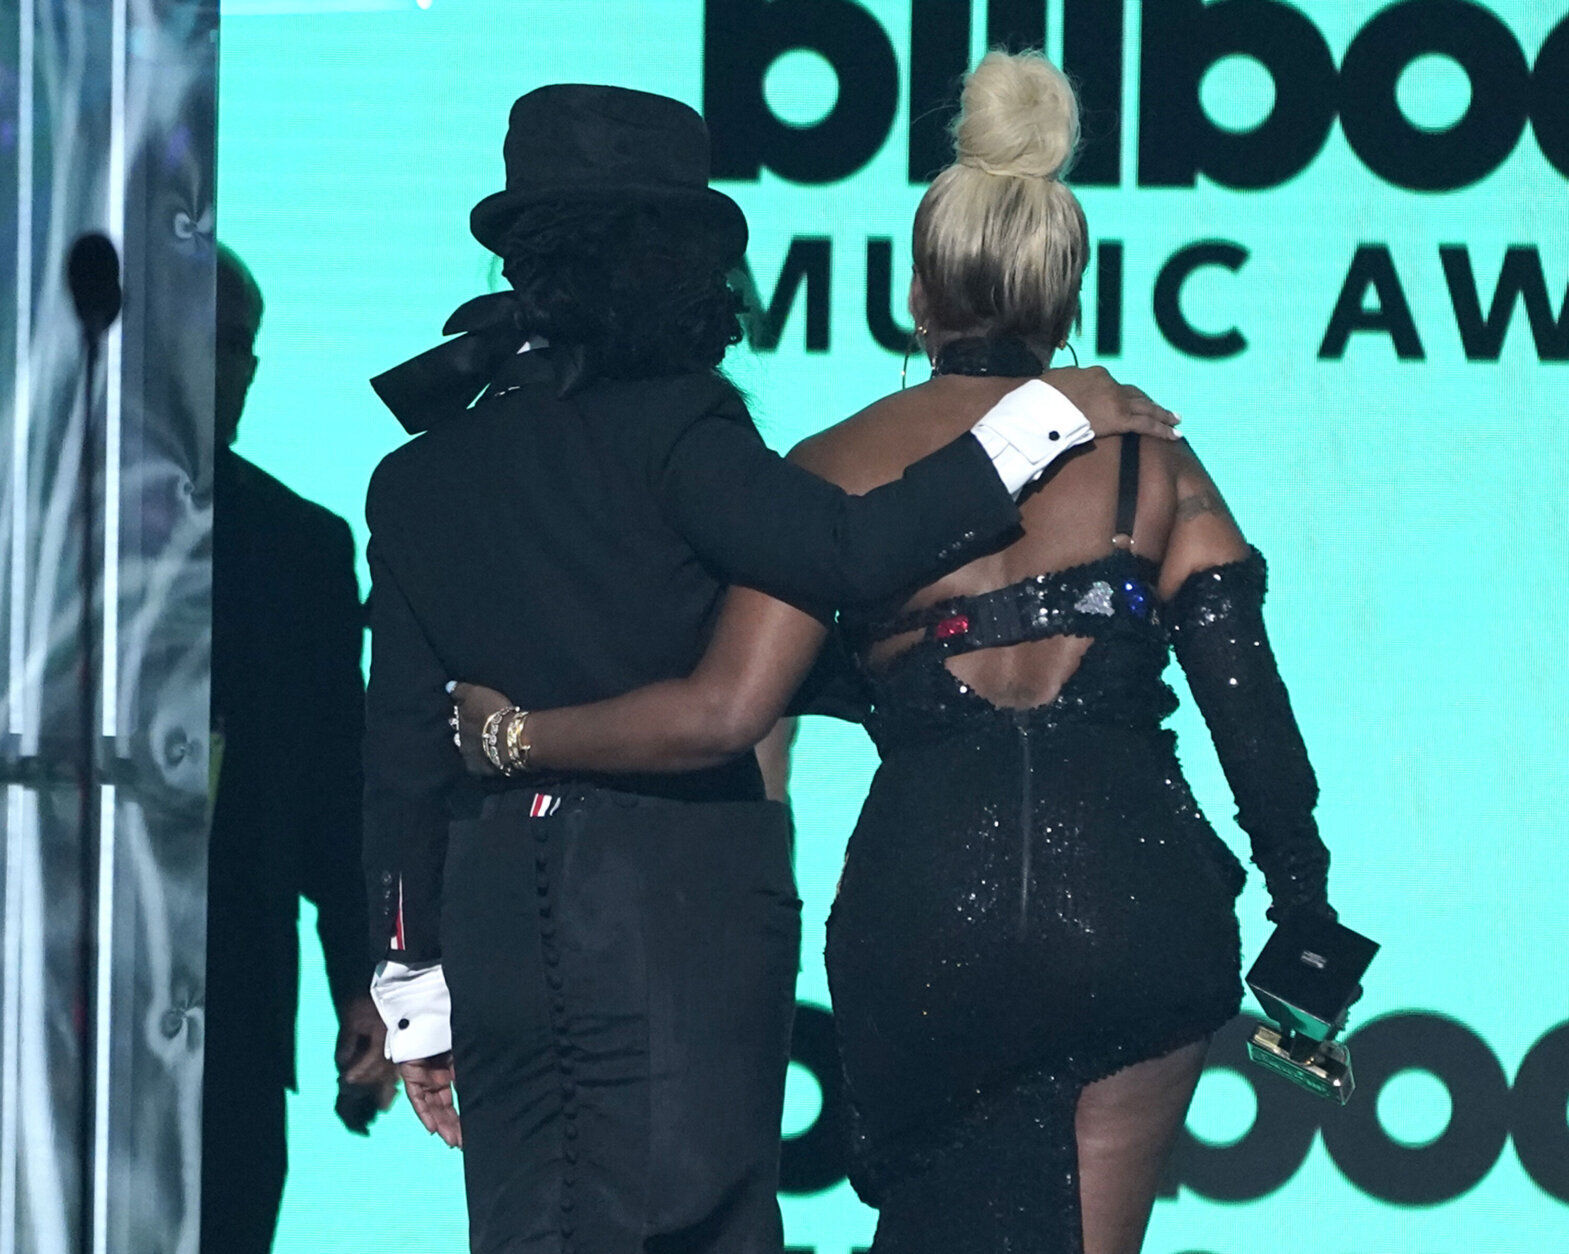 Presenter Janet Jackson, left, and Mary J. Blige walk offstage after the presentation of the Icon Award at the Billboard Music Awards on Sunday, May 15, 2022, at the MGM Grand Garden Arena in Las Vegas. (AP Photo/Chris Pizzello)